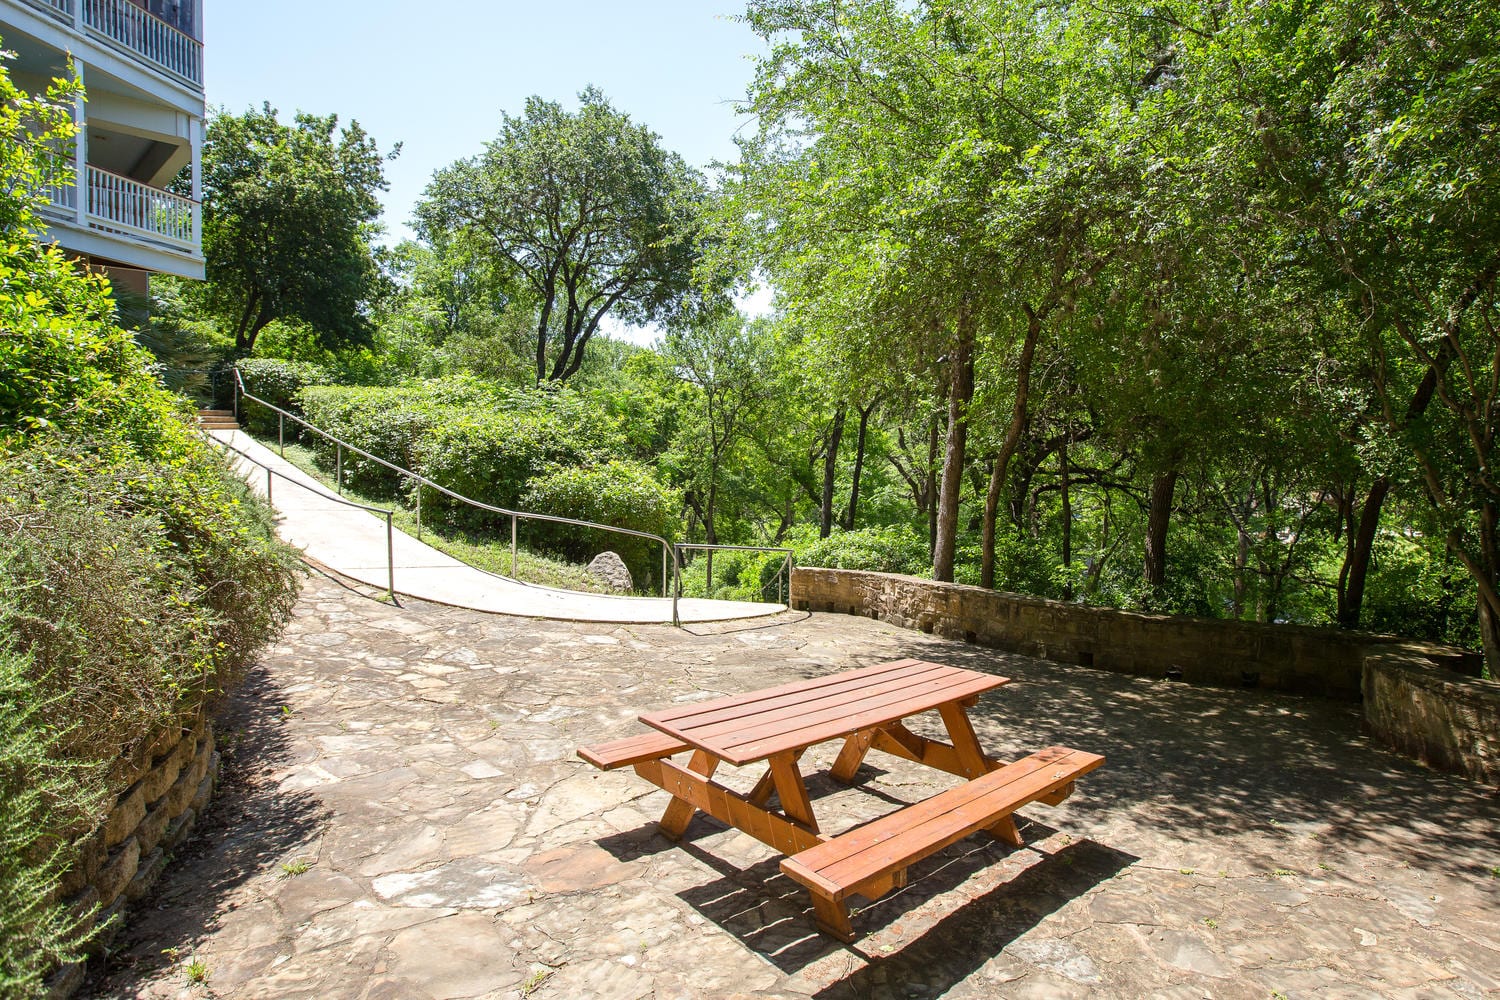 Village at Gruene walkway with picnic table.